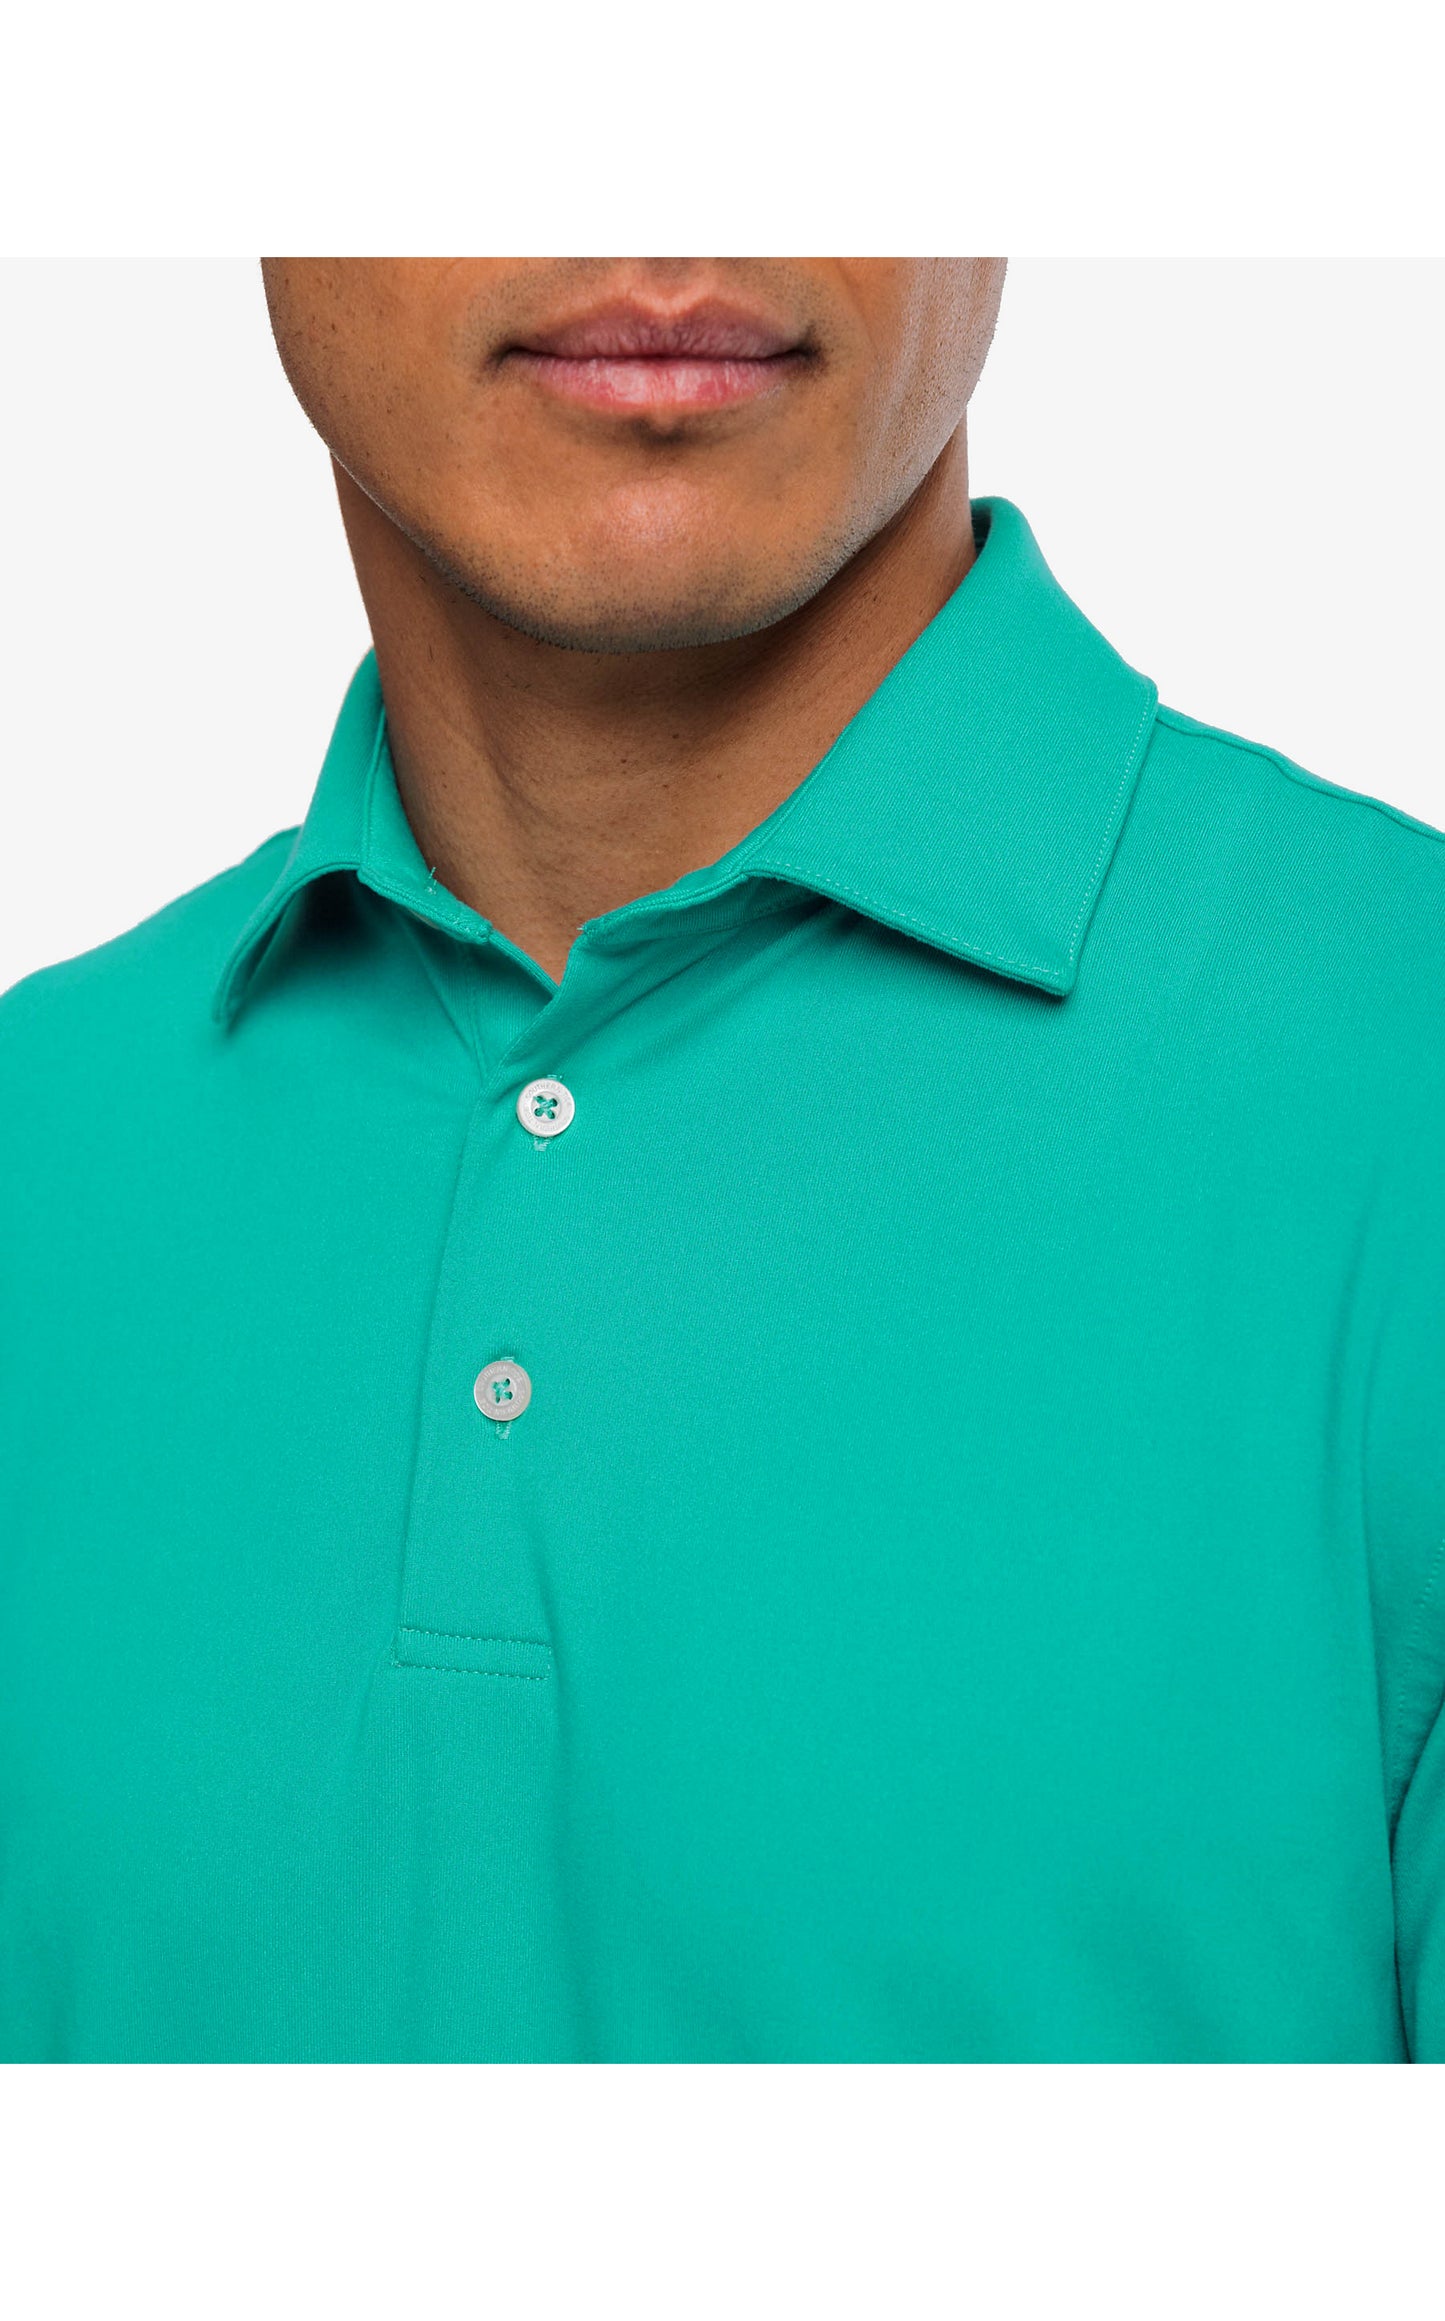 Lilly Pulitzer x Southern Tide: Men's Southern Tide Ryder Polo in Water Lilly Green